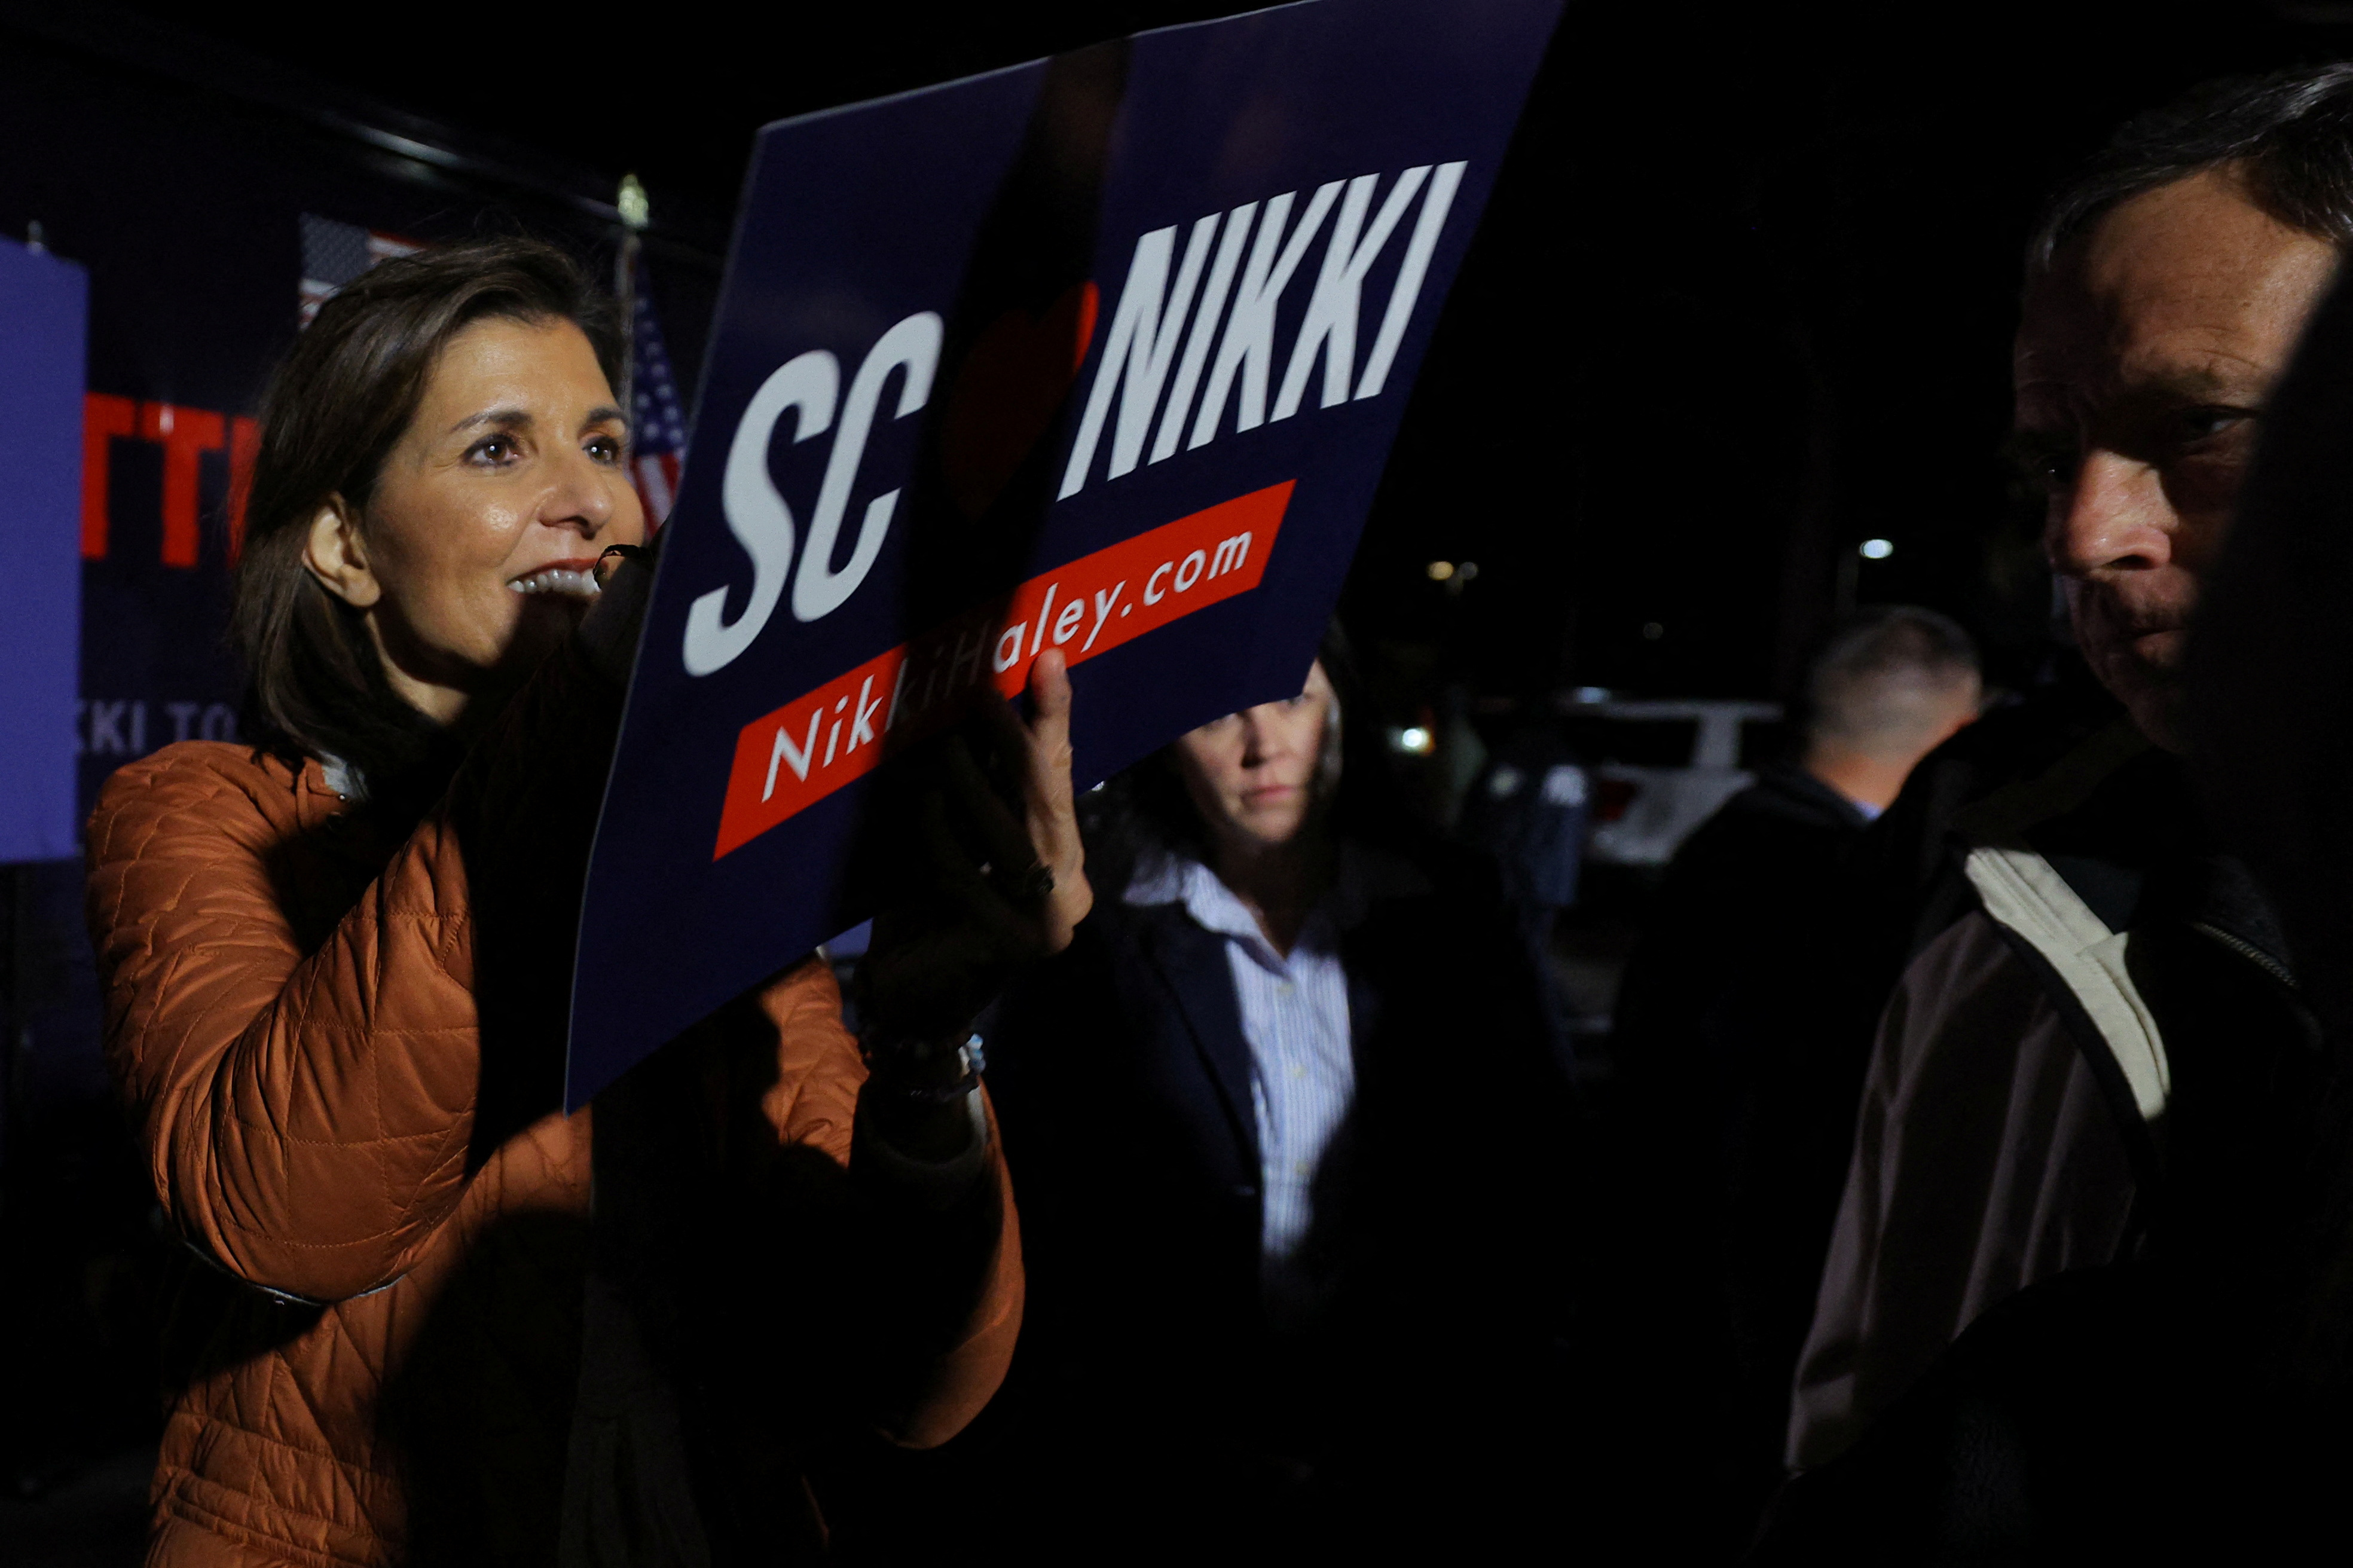 Republican presidential candidate Haley campaigns in Myrtle Beach